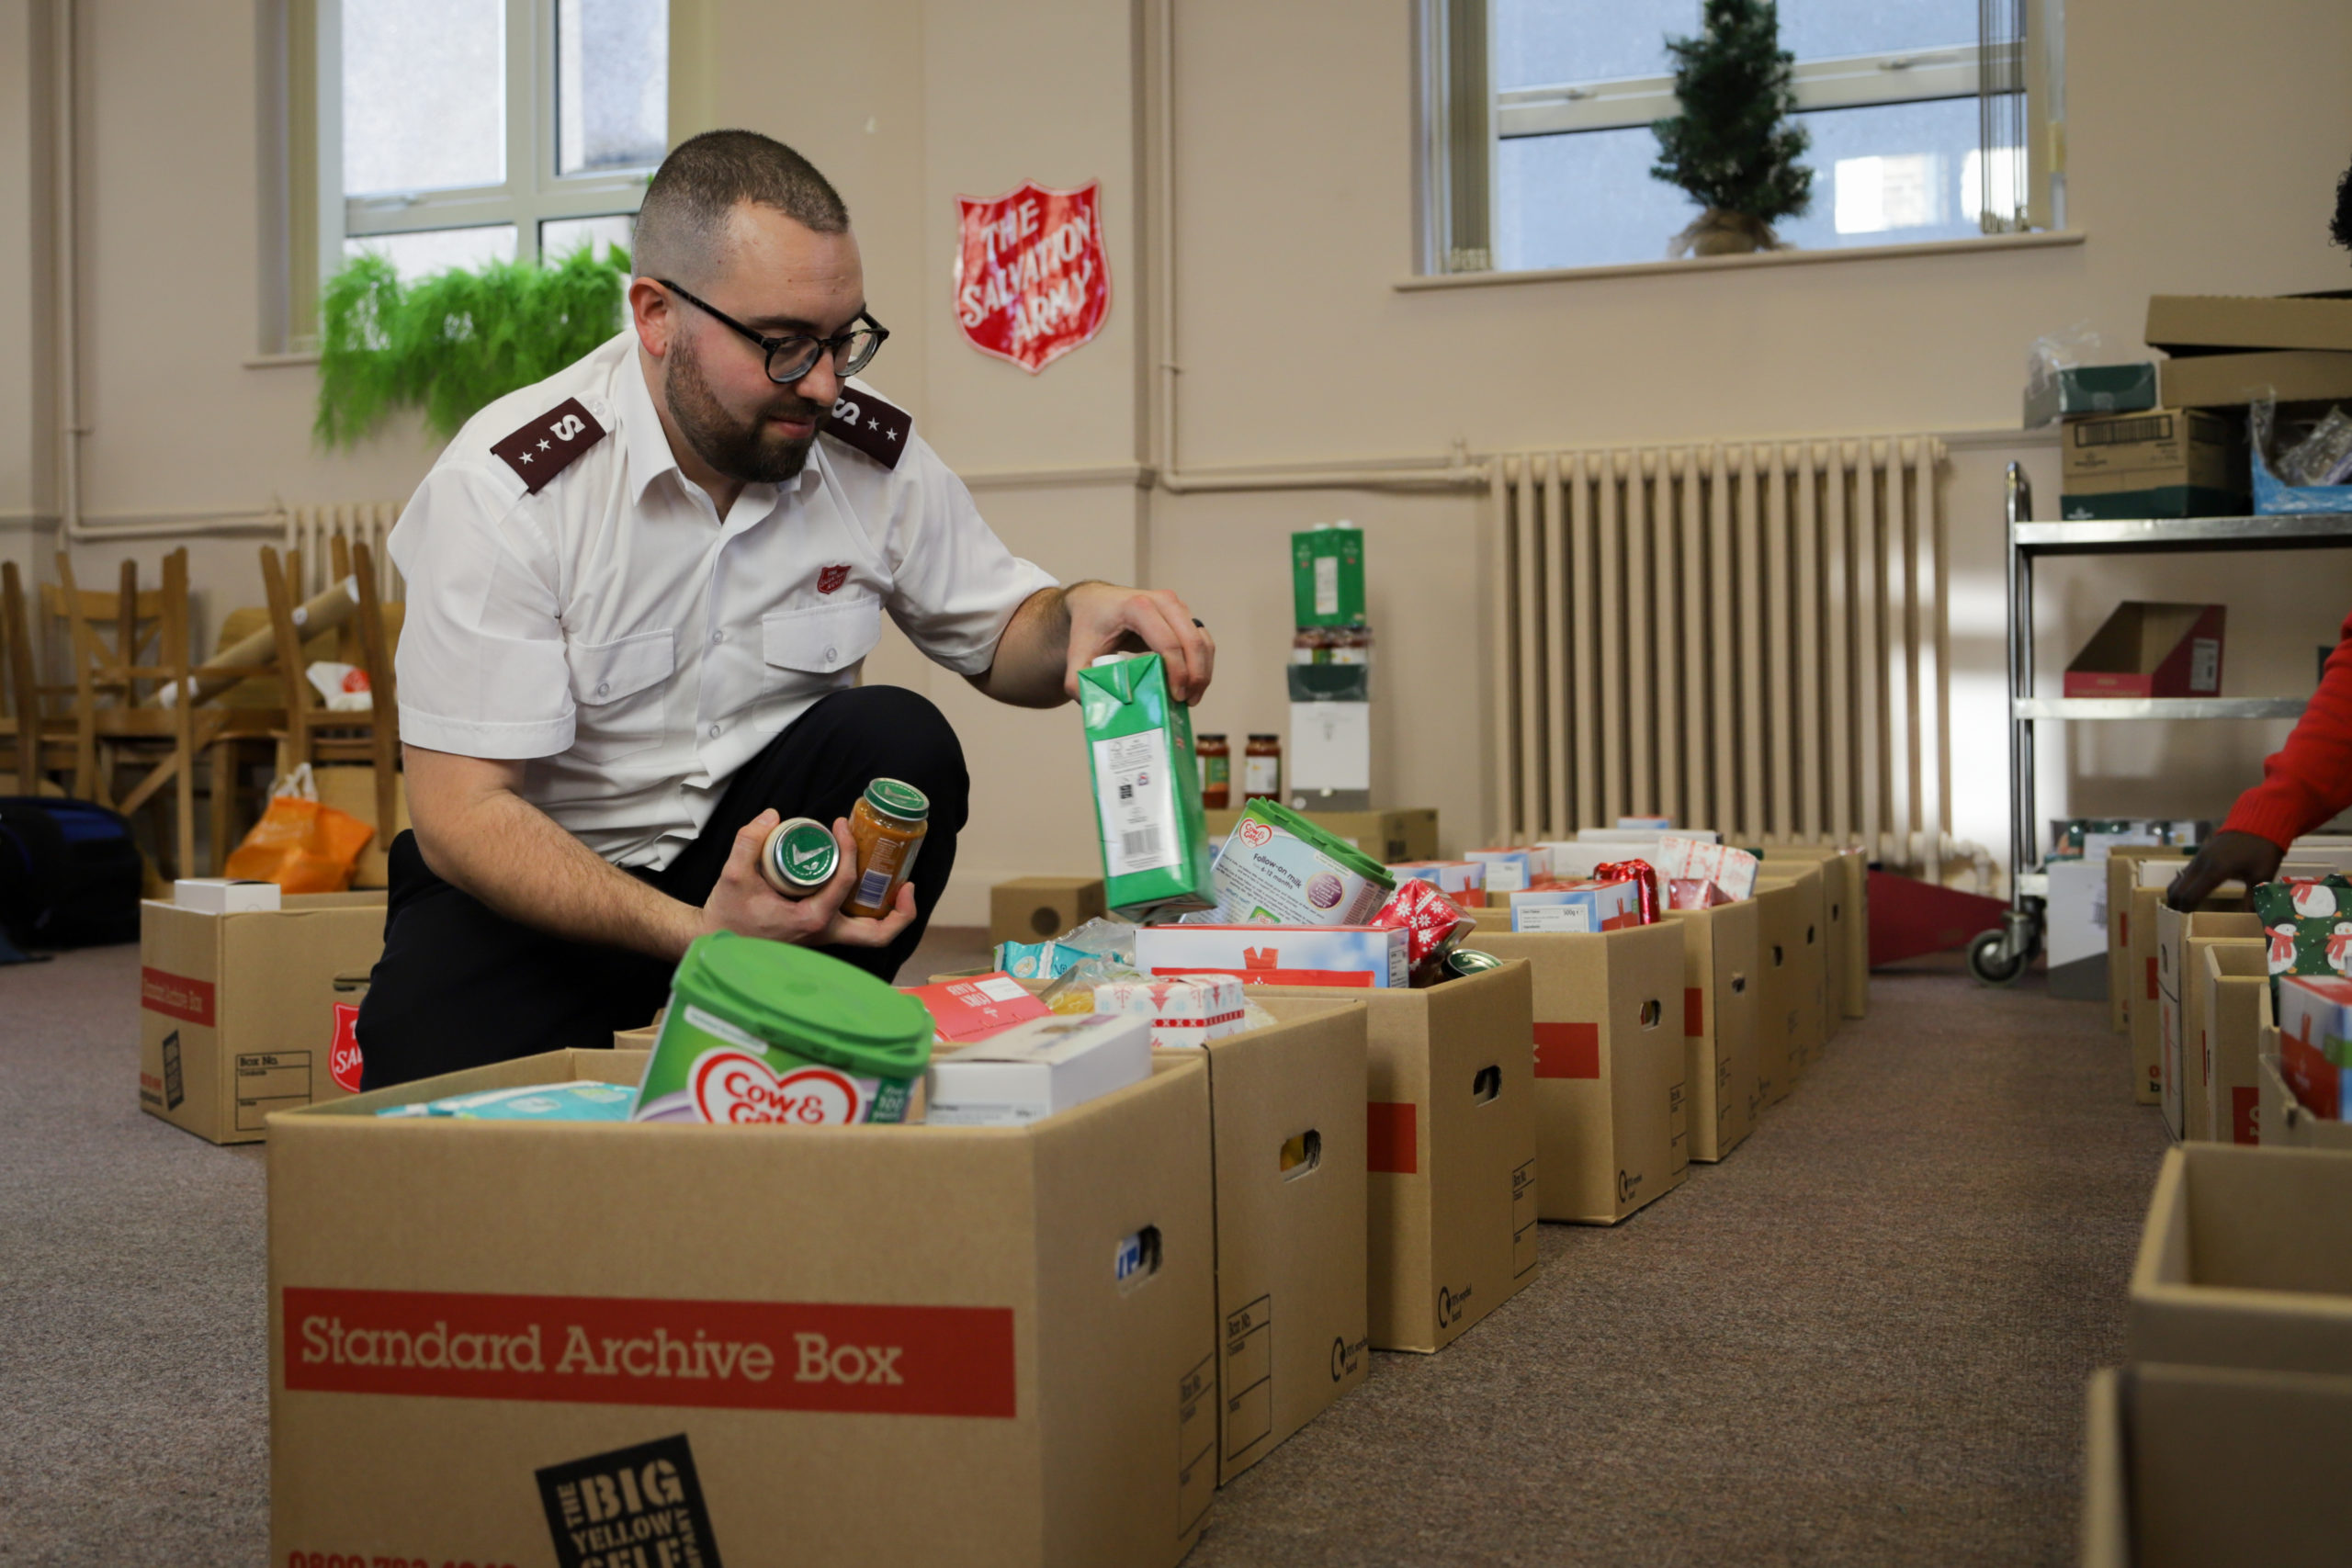 Salvationist putting food items in boxes for donations.